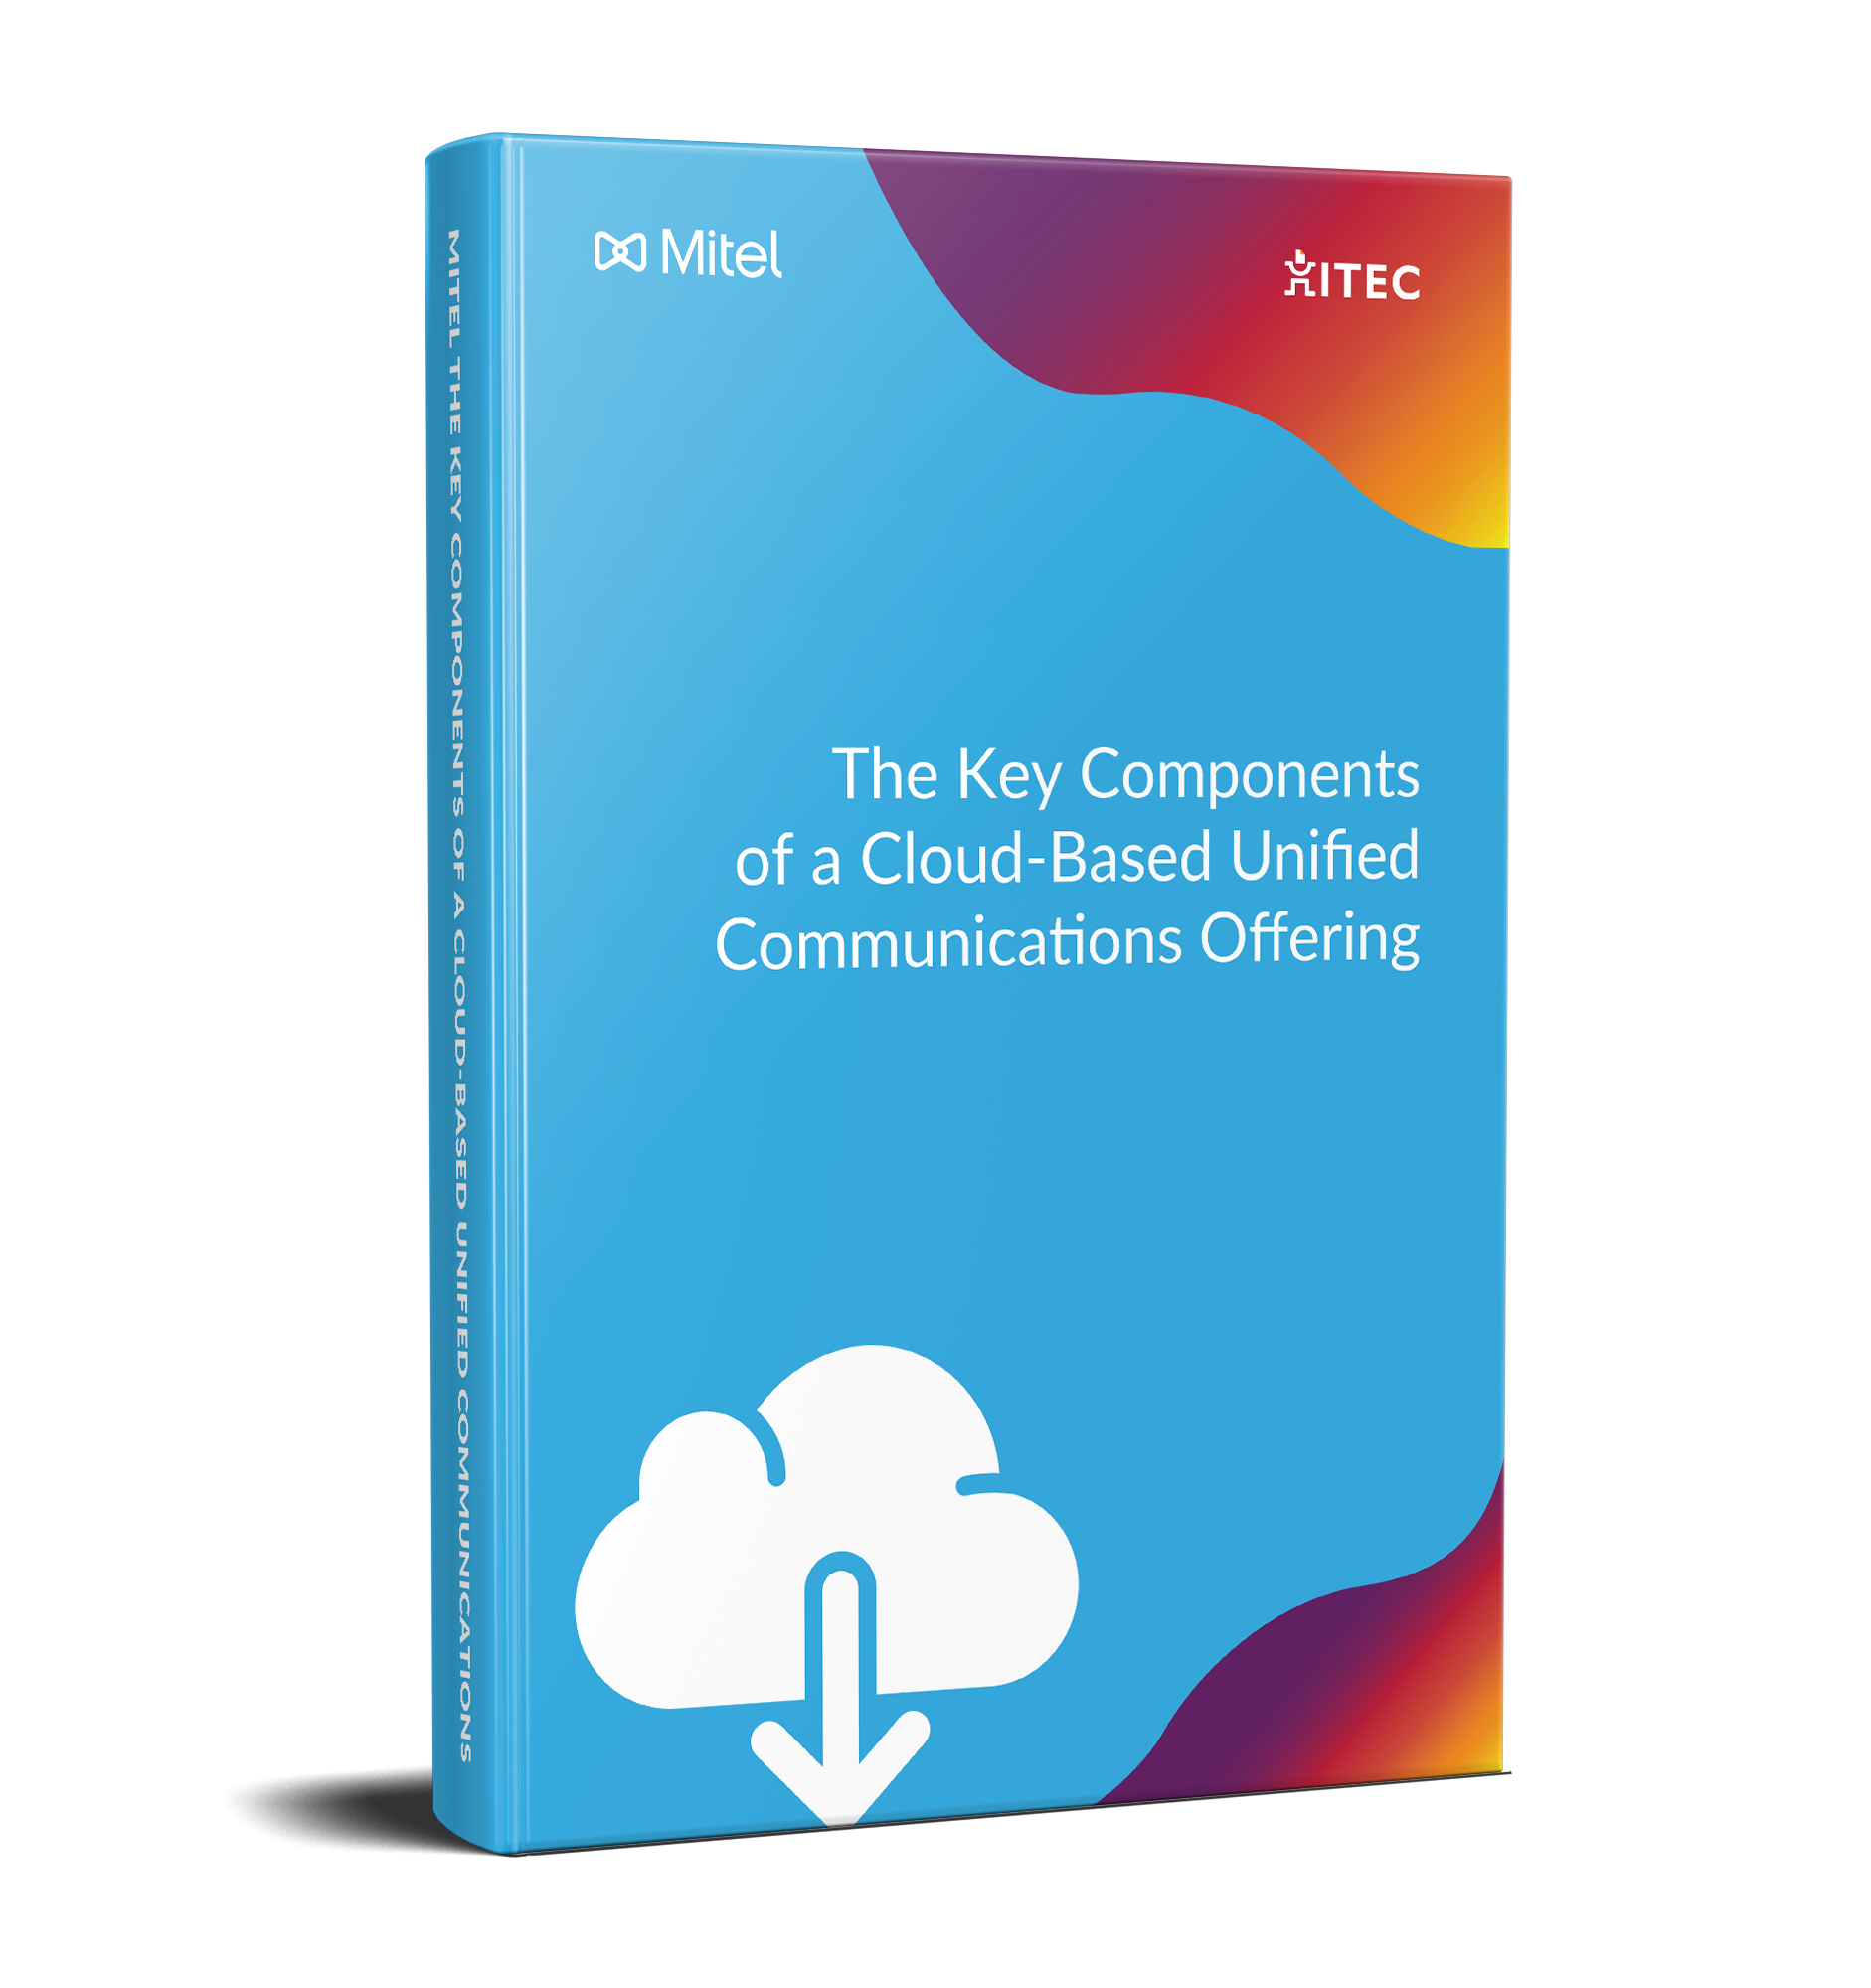 The-Key-Components-of-a-Cloud-Based-Unified-Communications-Offering